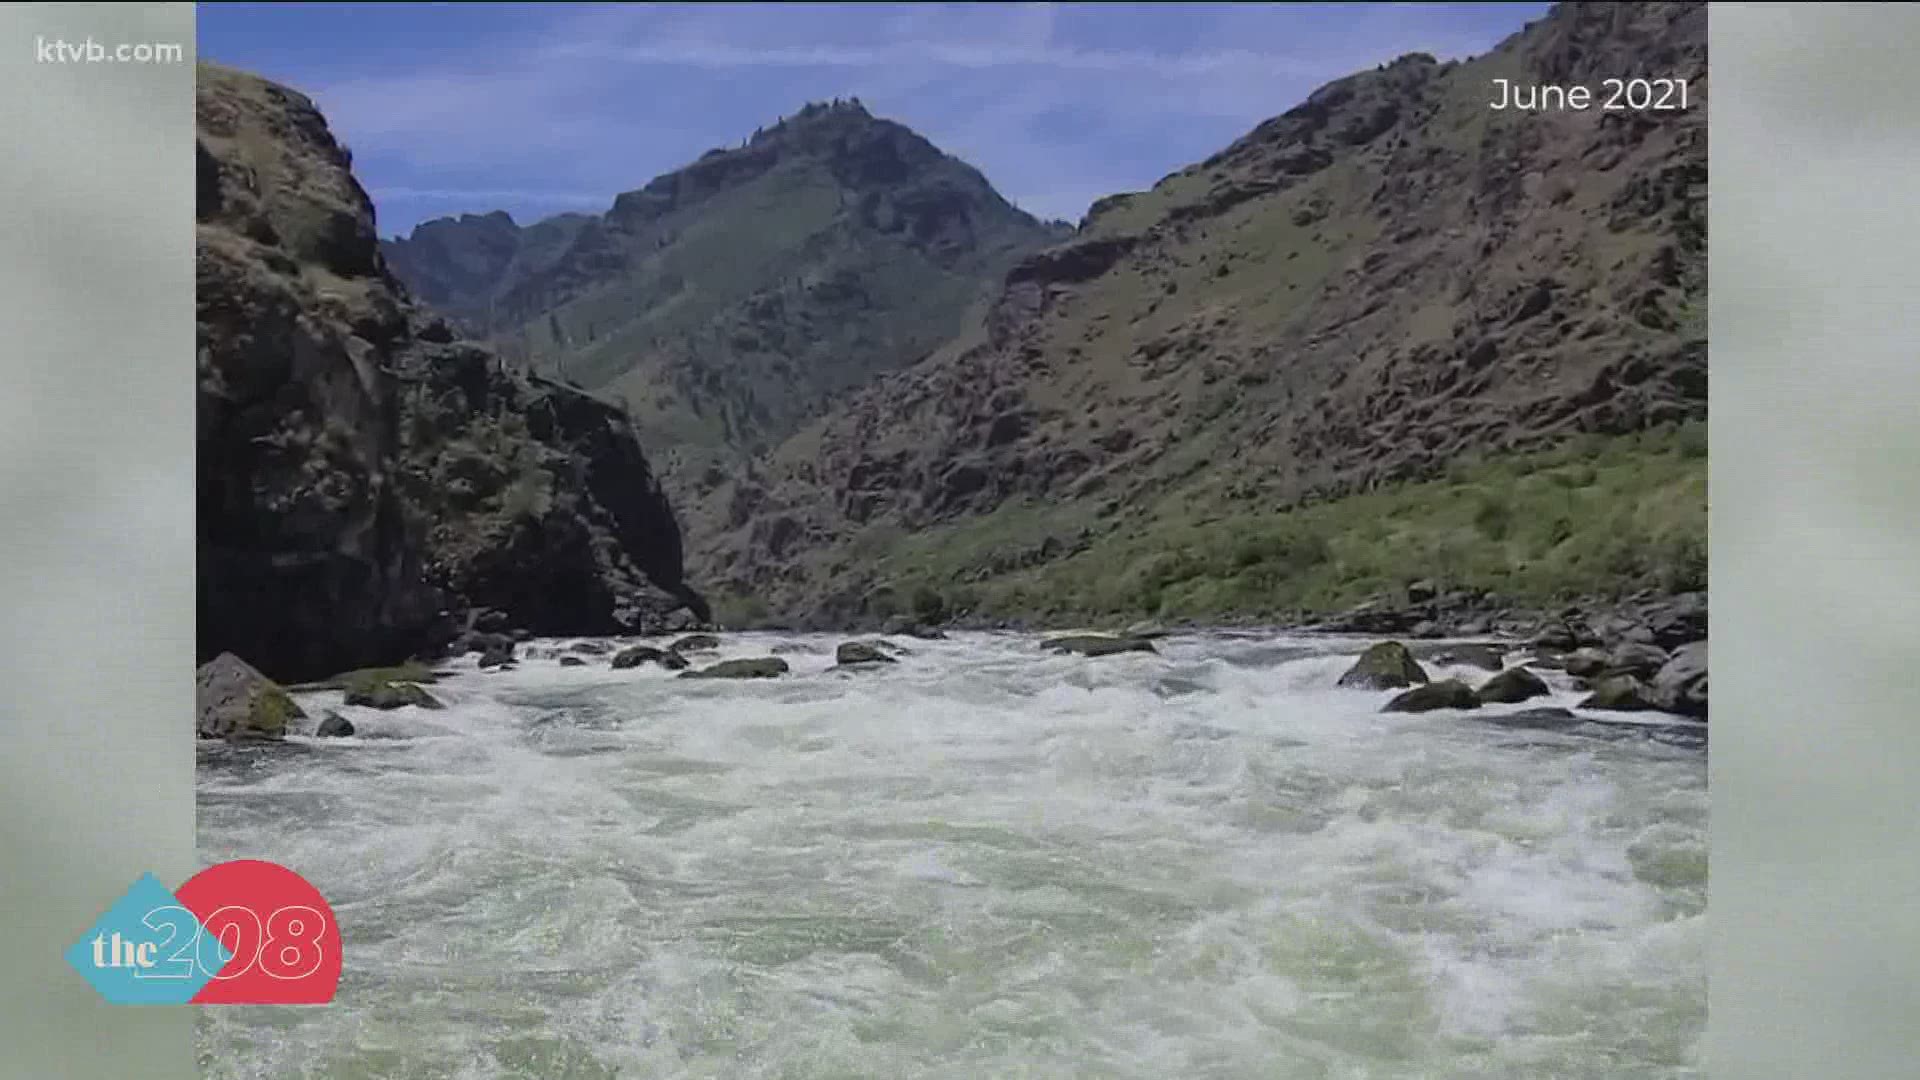 This year, the water flow in Hells Canyon has dropped to about 6,500 cubic feet per second from the usual 20,000 to 50,000 cfs.